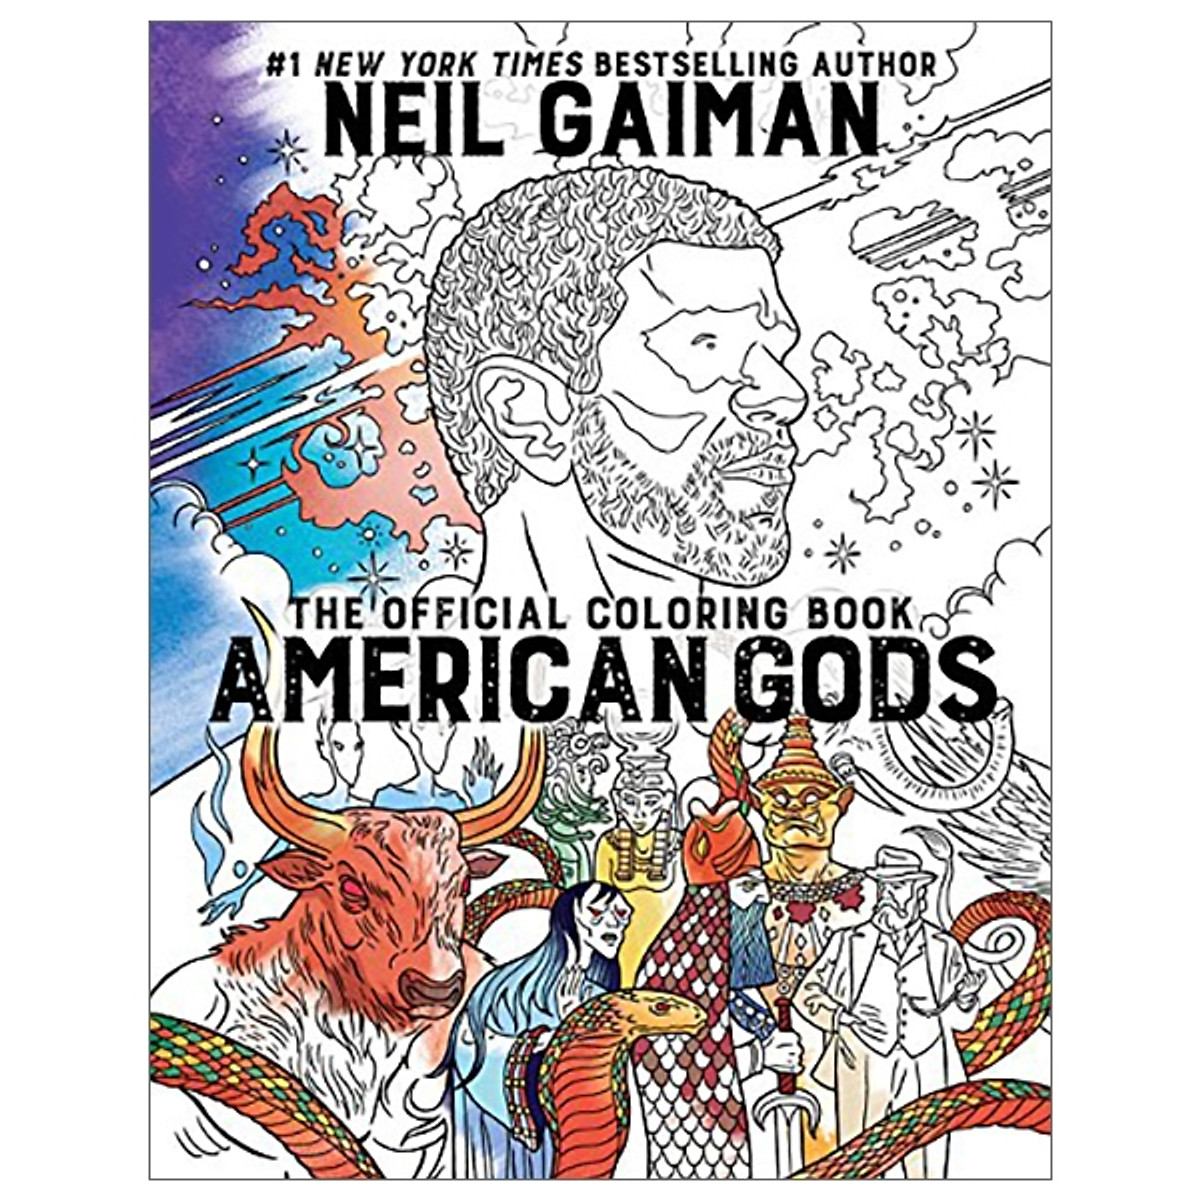 American Gods: The Official Coloring Book